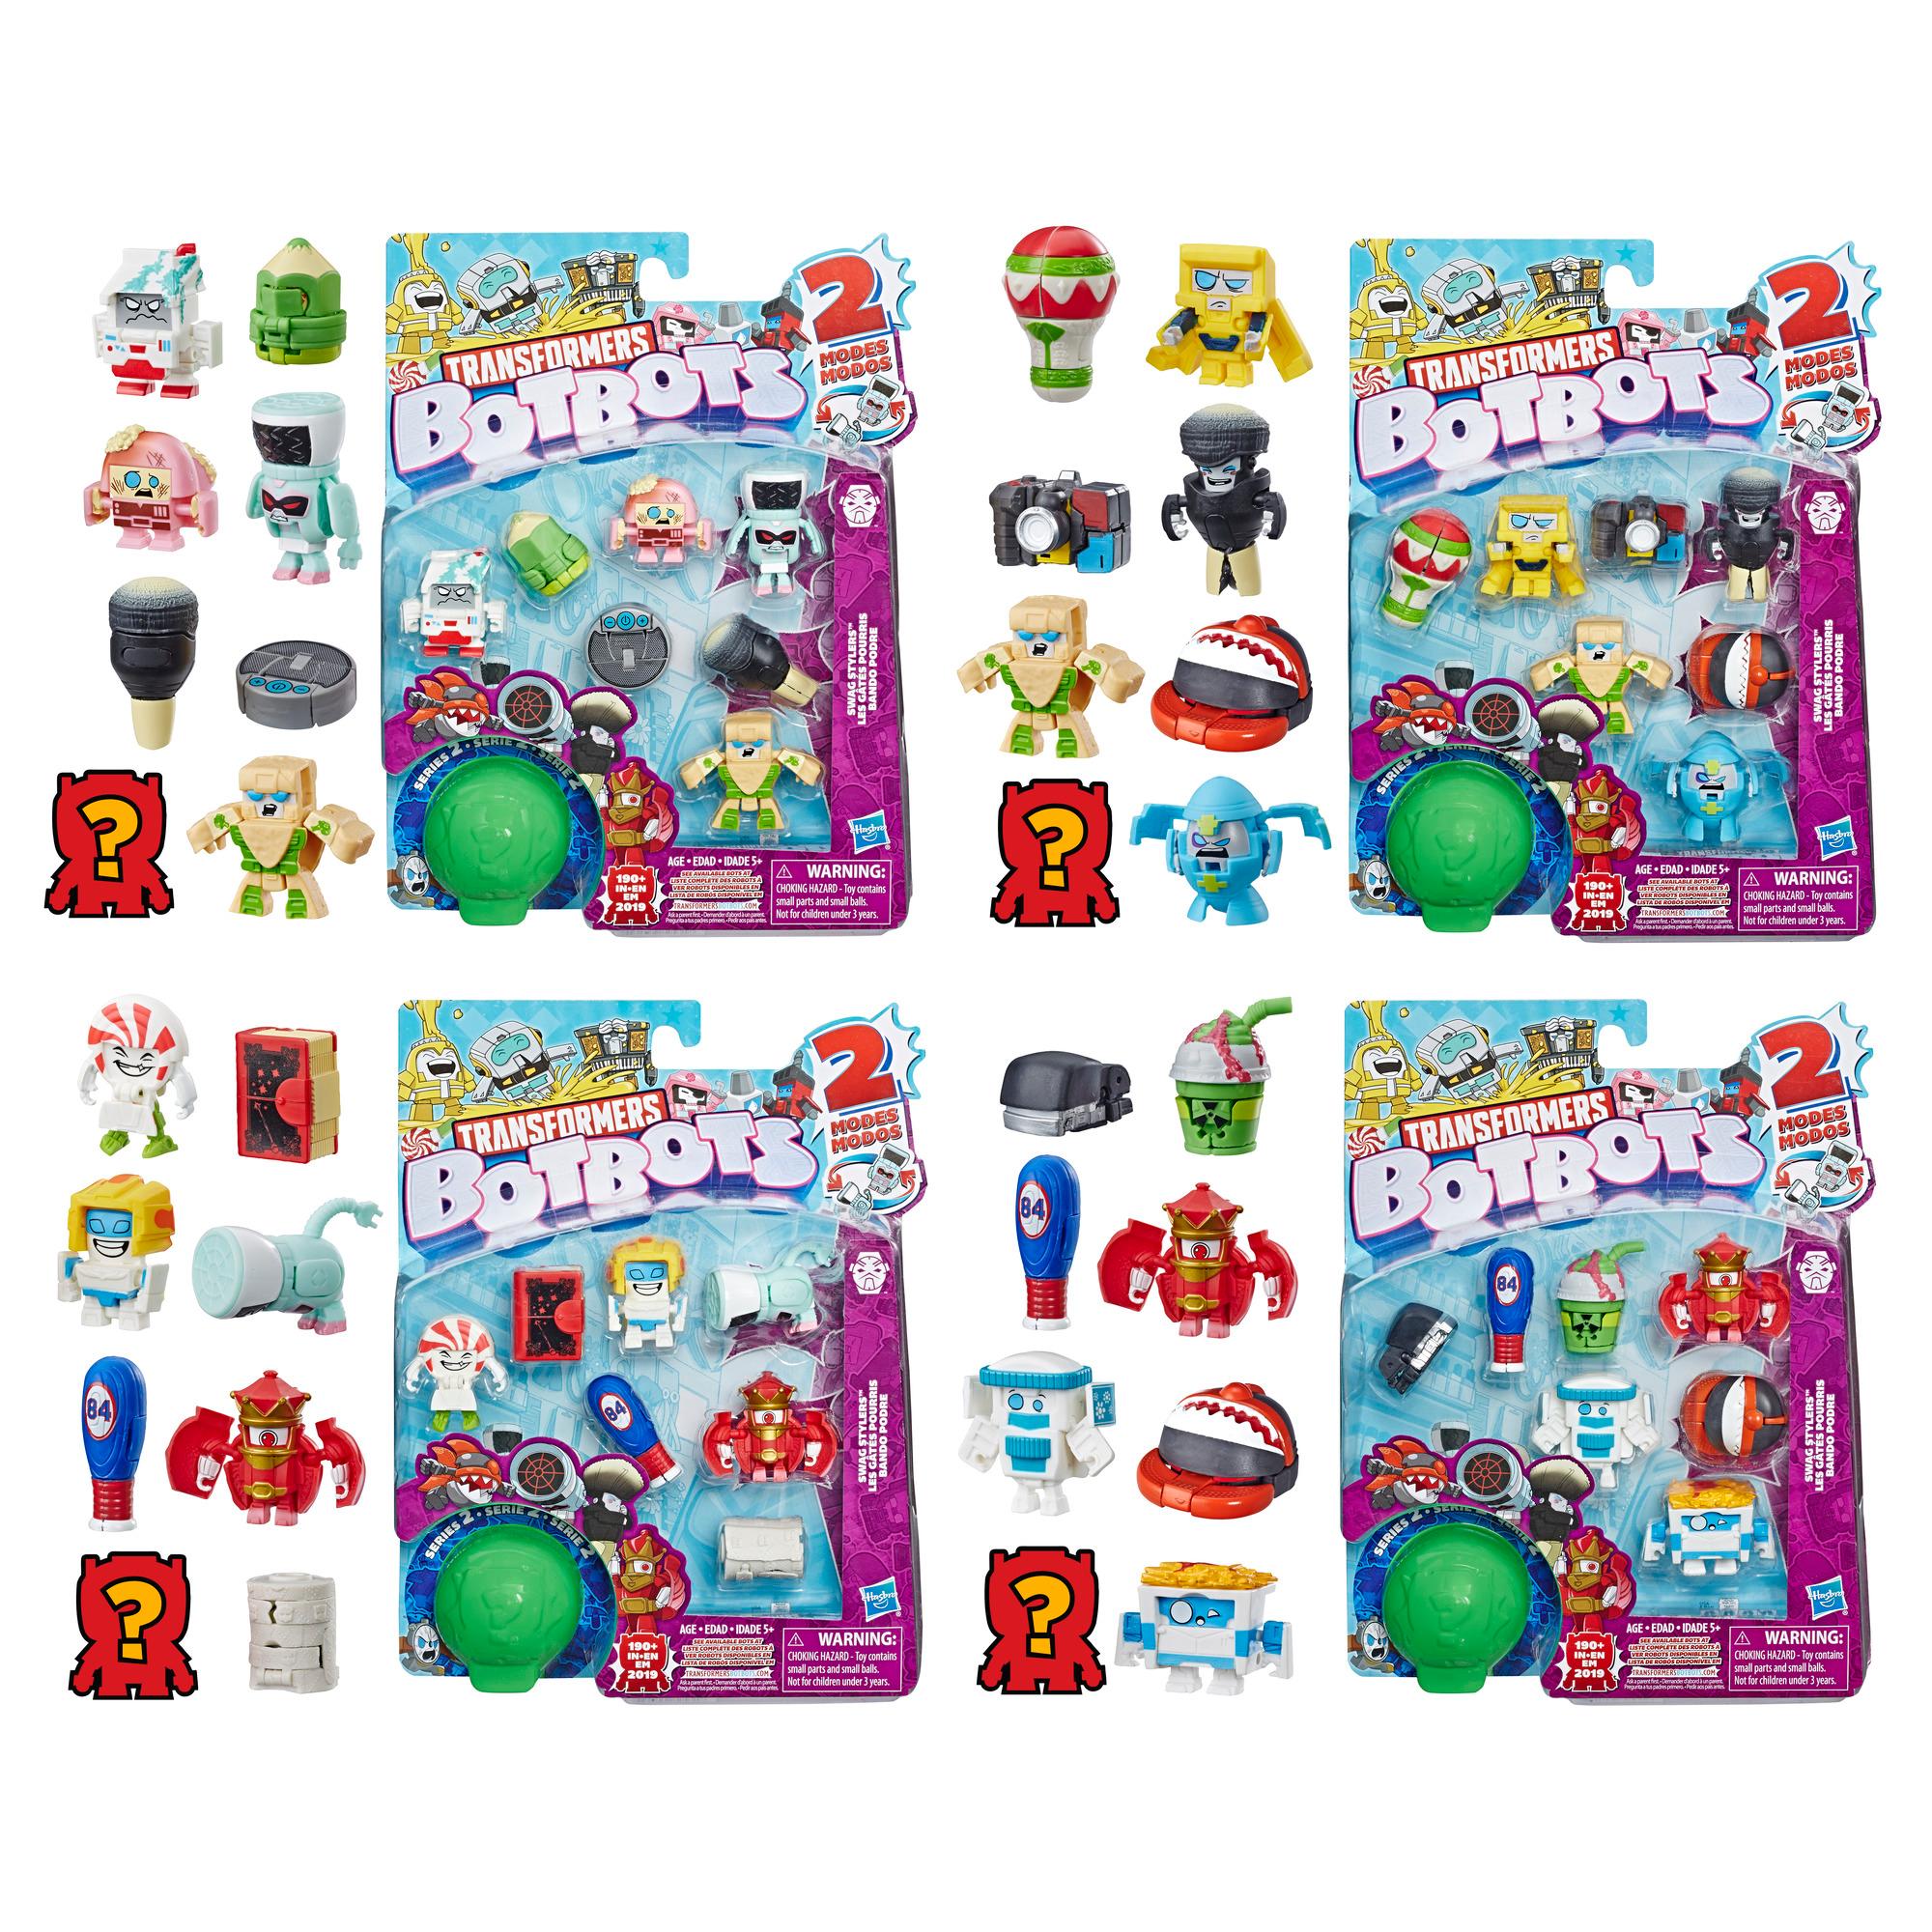 Transformers Toys BotBots Series 2 Swag Stylers 8-Pack  Mystery 2-In-1 Collectible Figures! Kids Ages 5 and Up (Styles and Colors May Vary) by Hasbro